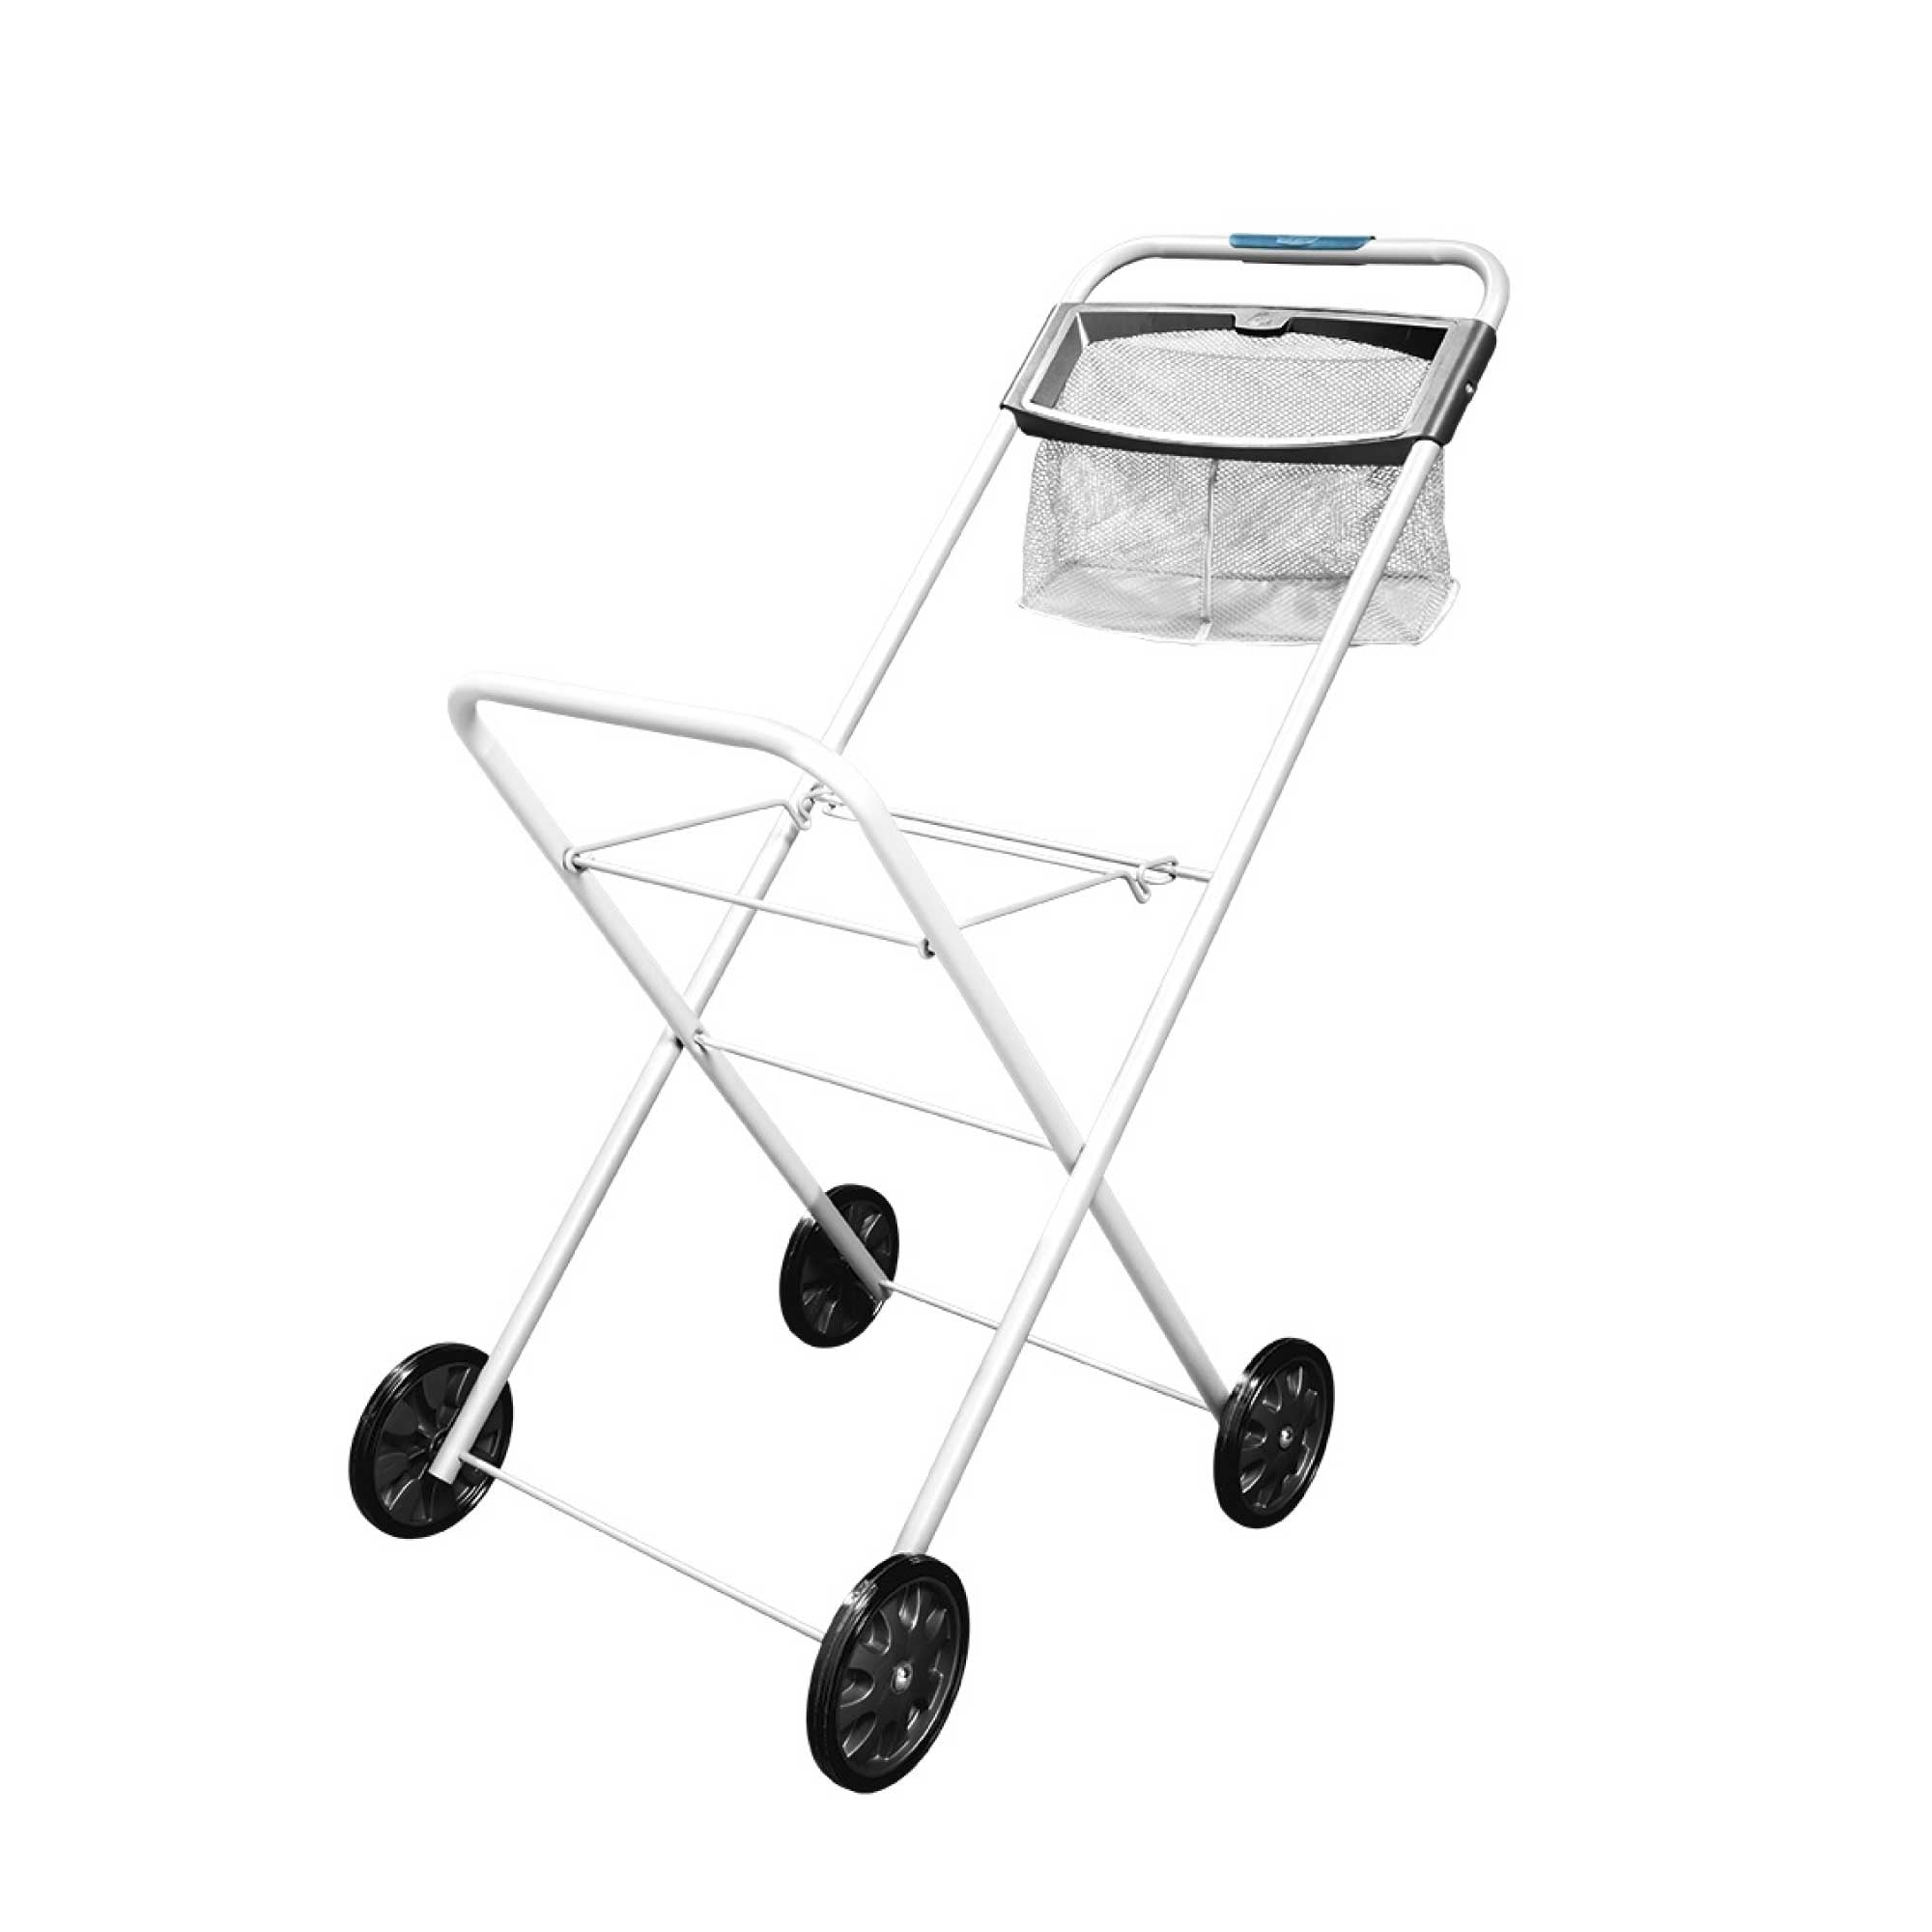 Premium Laundry Trolley For Clothes Washing Basket Integrated Peg Basket